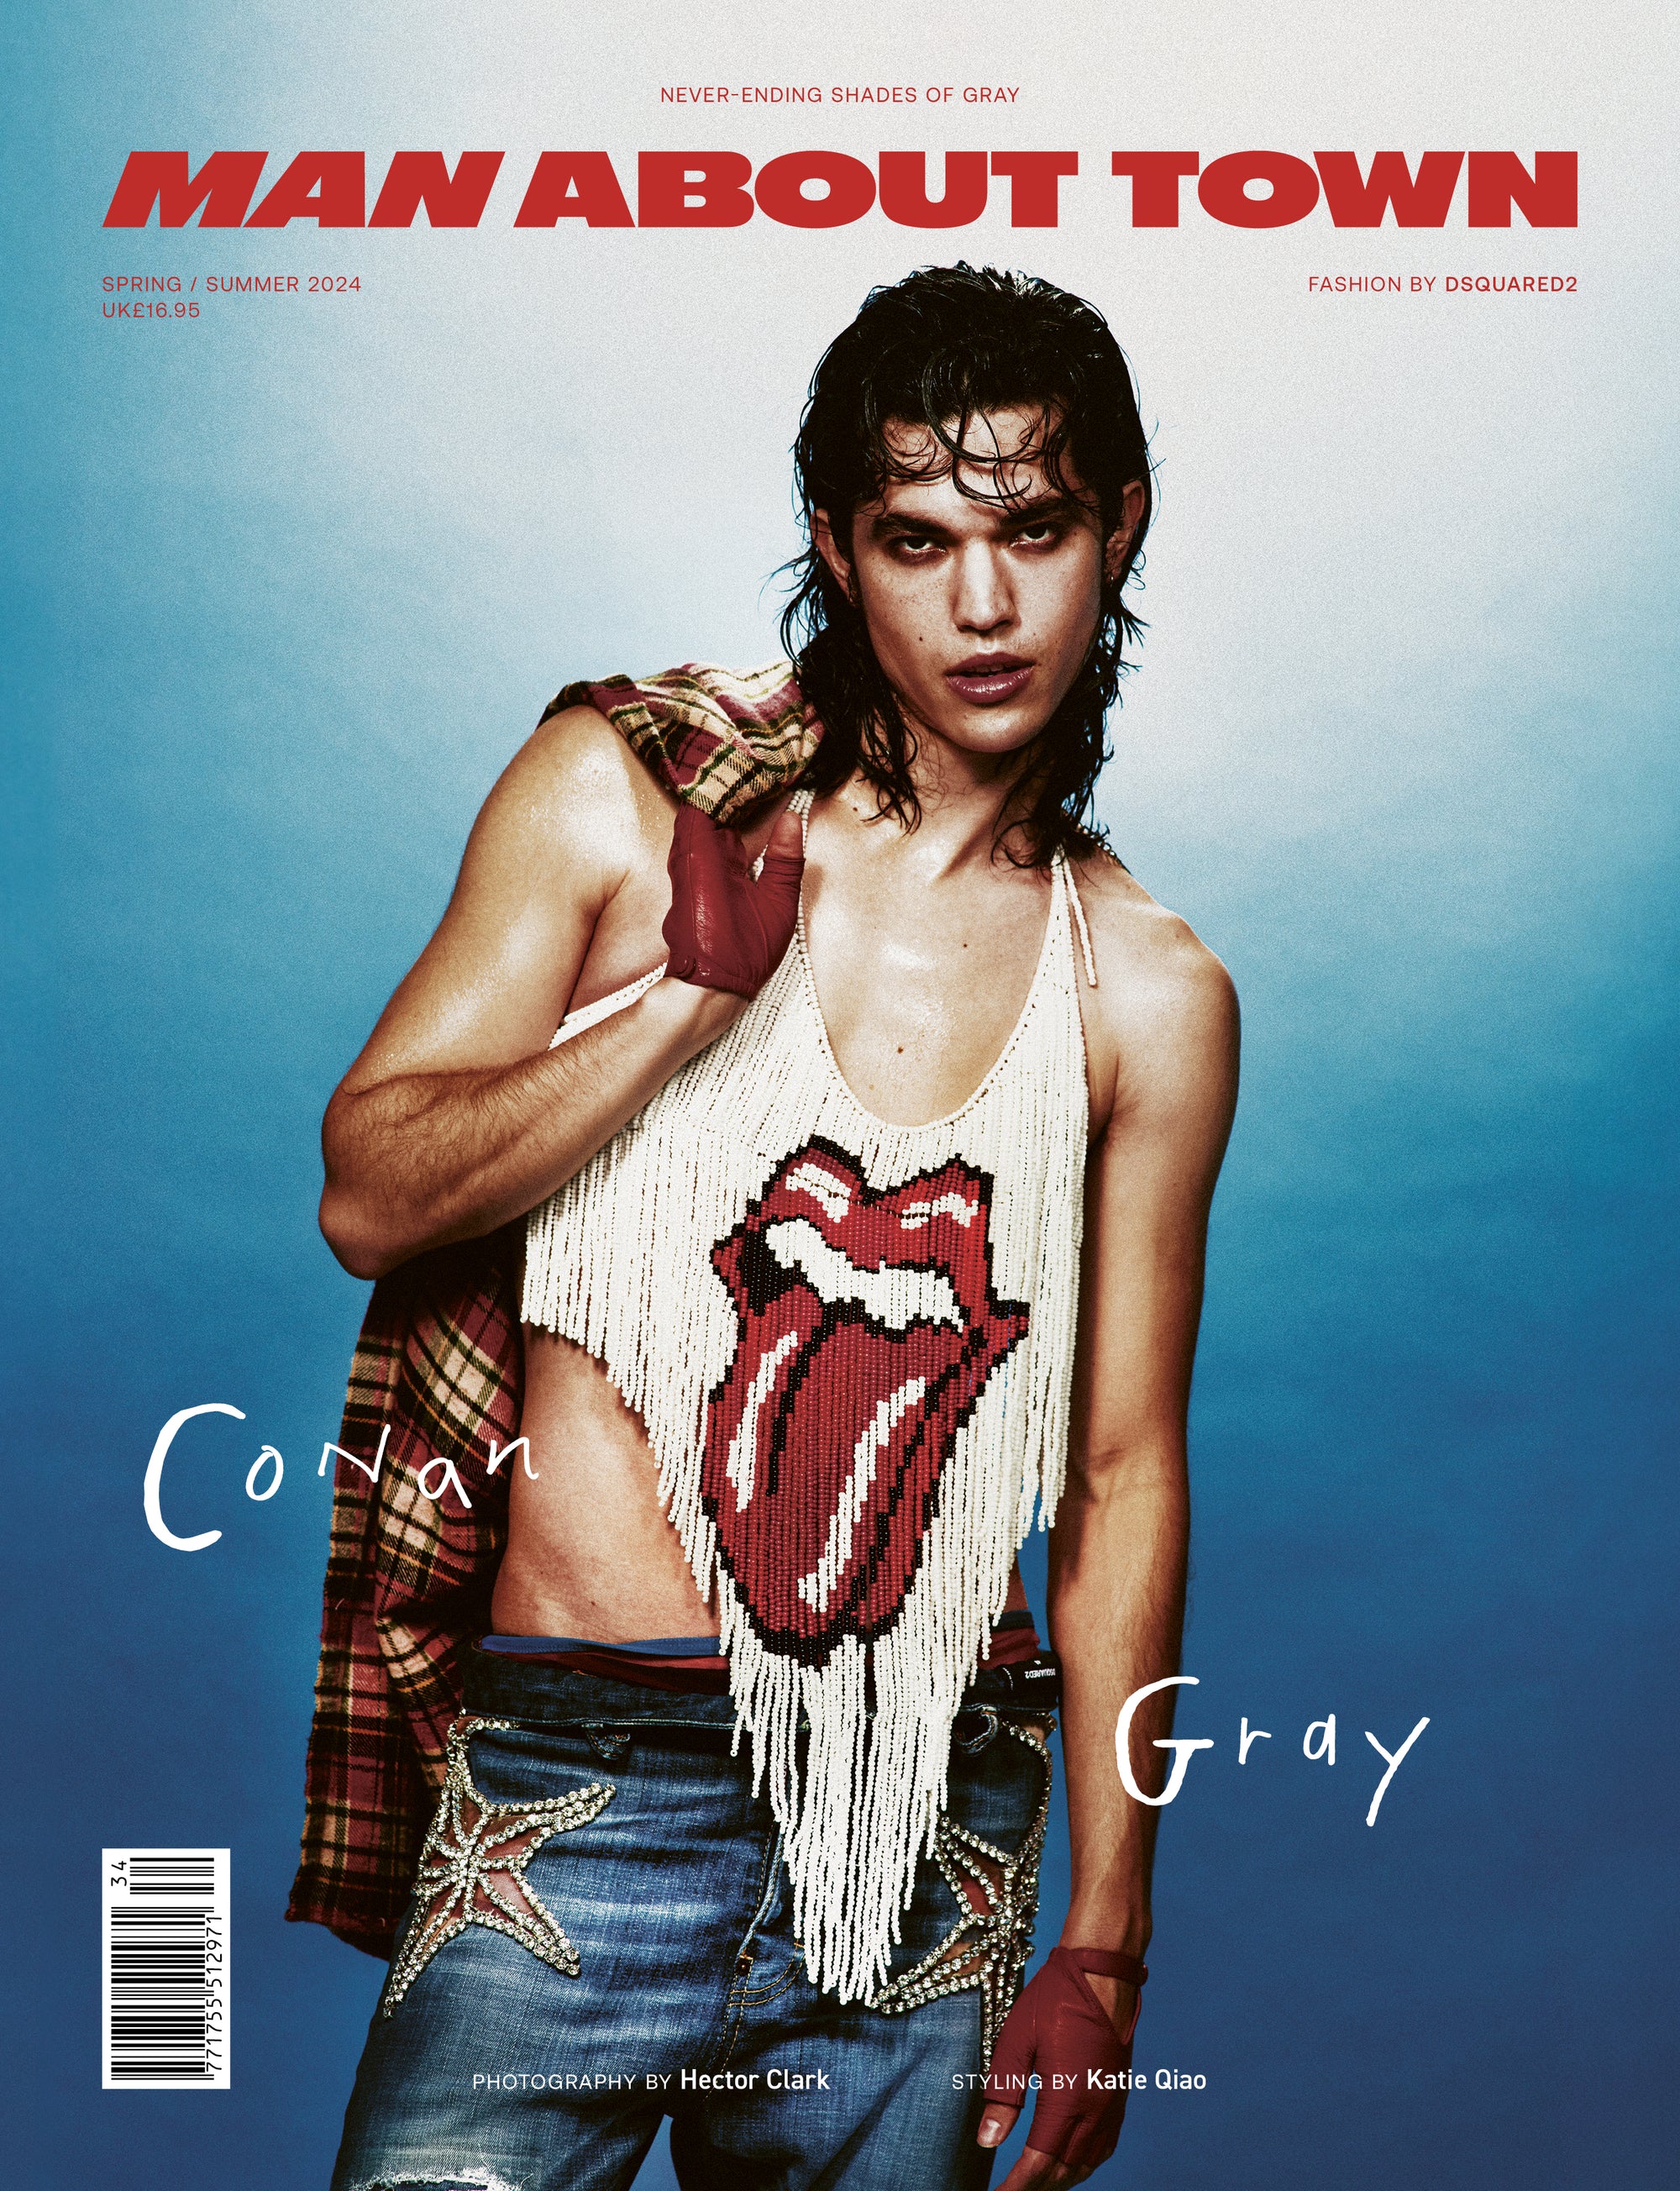 Conan Gray Covers Man About Town's Spring/Summer 2024 Issue, Wearing Dsquared2